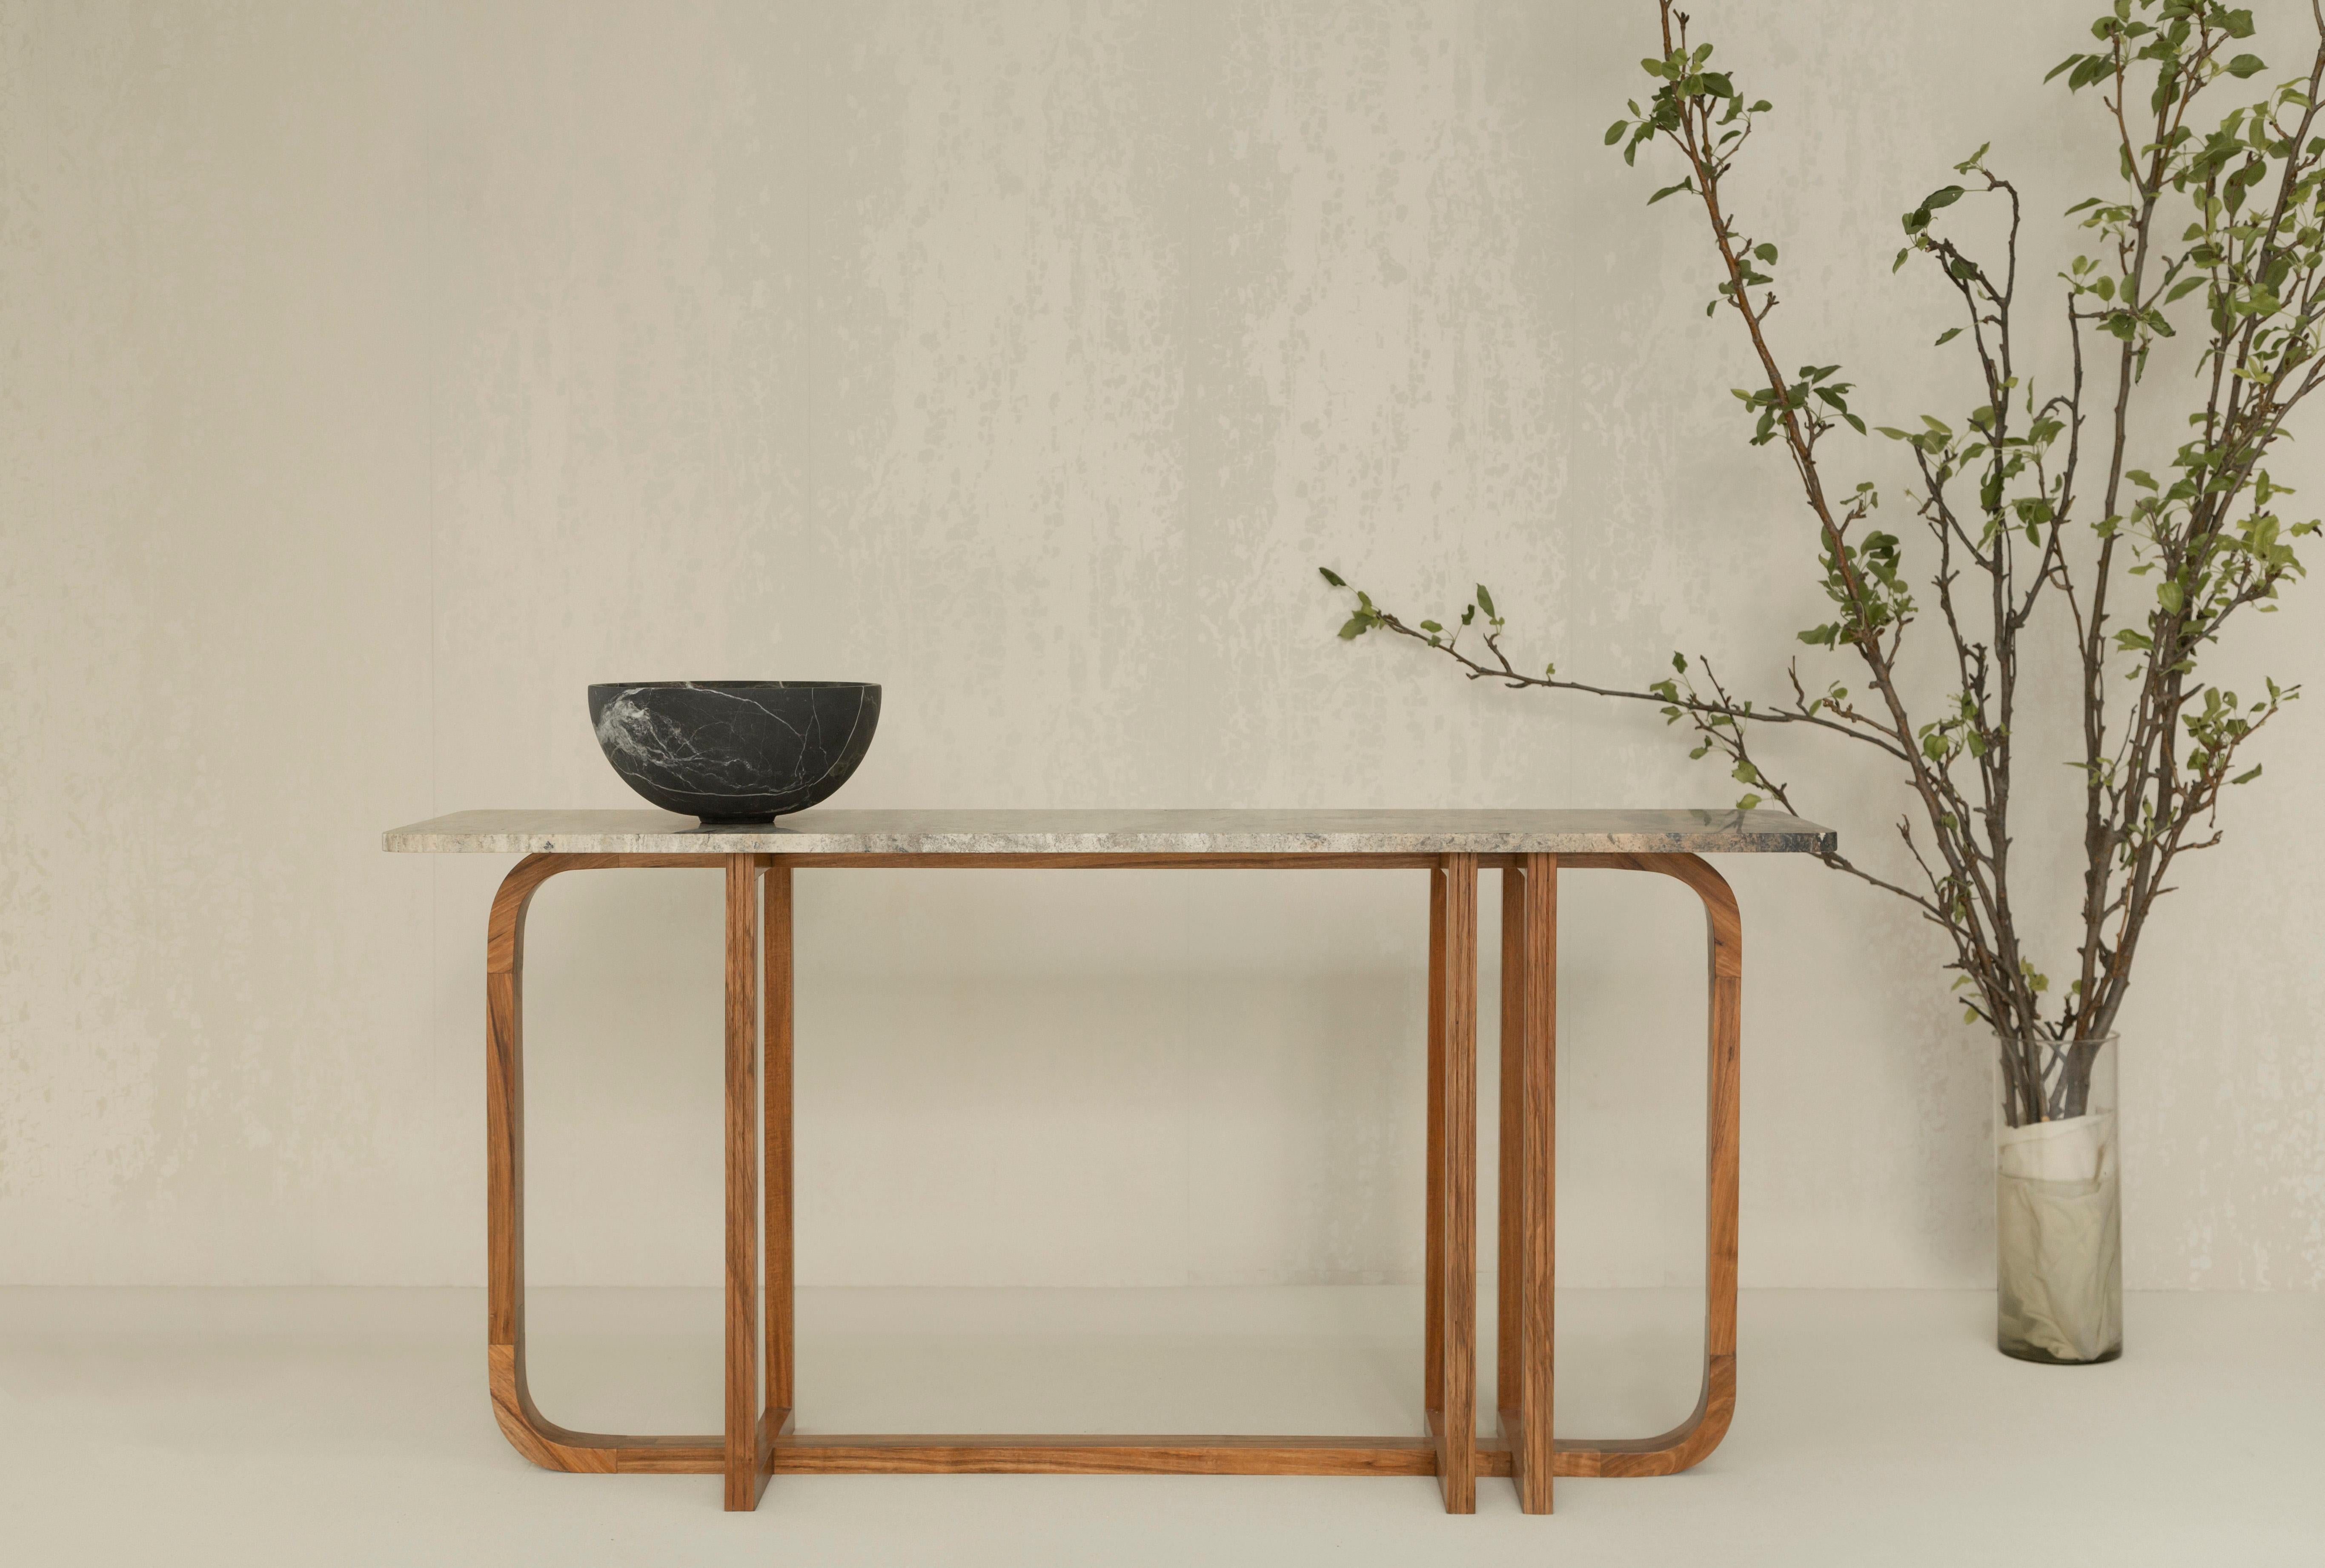 Crafted with precision, the base of the Samara Console Table is meticulously fashioned from Tzalam wood, a Mexican hardwood known for its rich tones and durability. The top, a stunning terracotta travertine marble, not only complements the wood base